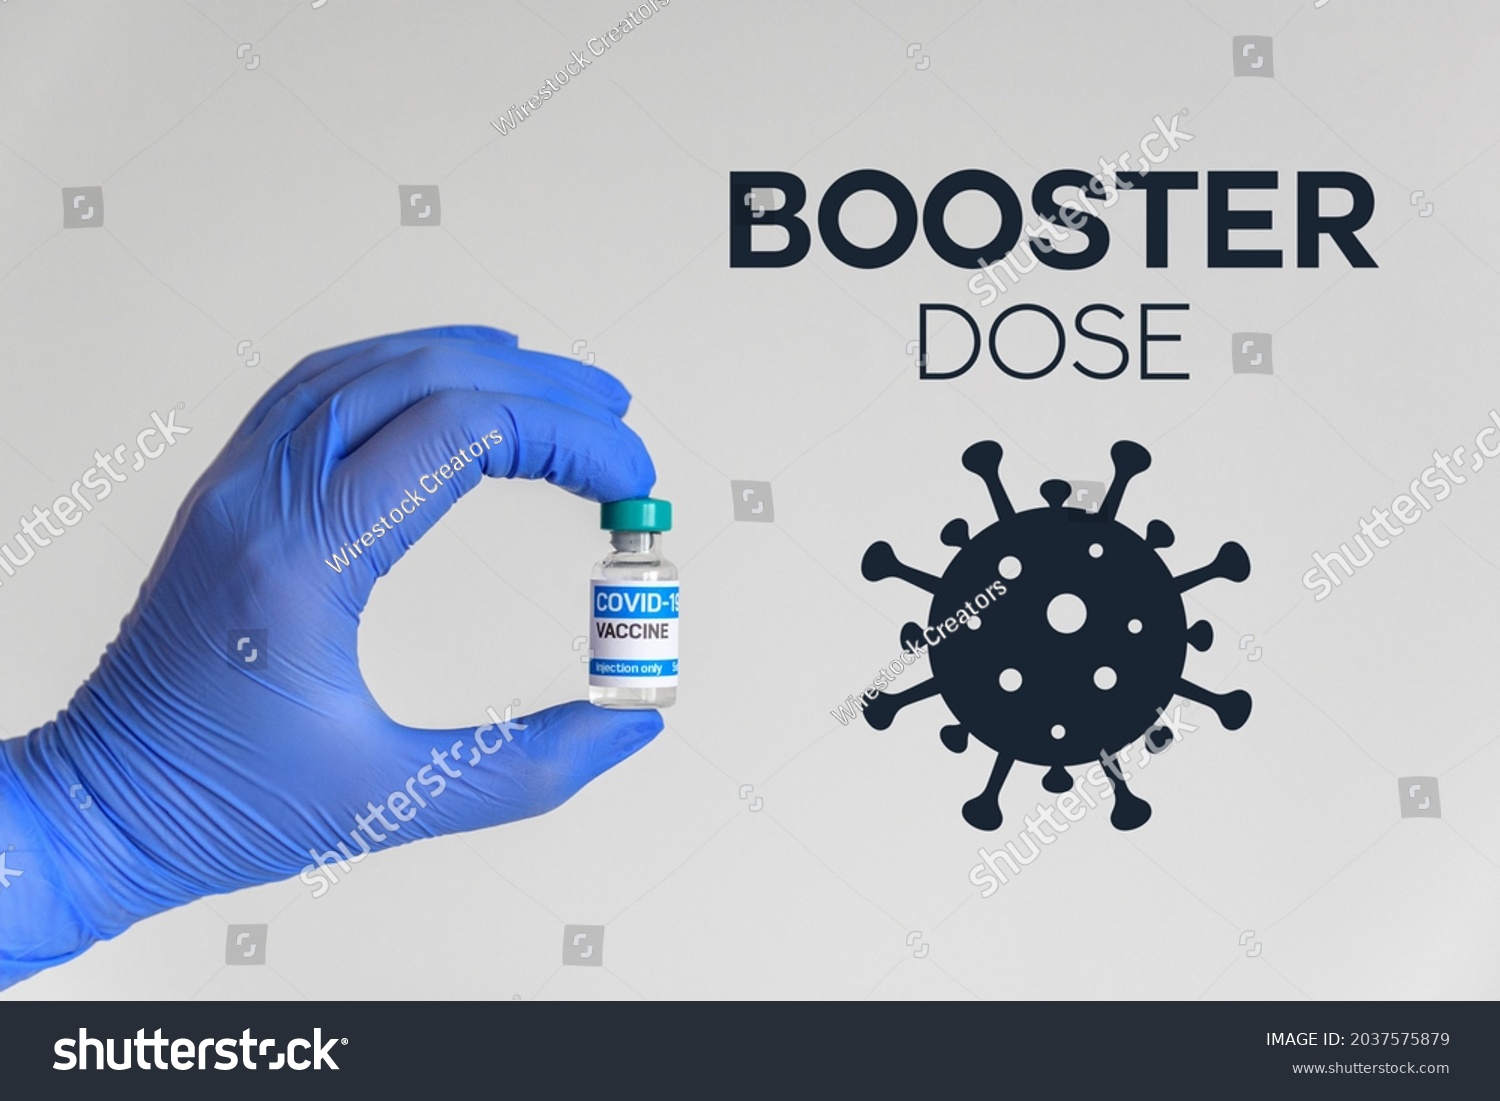 Hand in gloves holding vaccine for covid-19  Booster dose text and corona virus icon  #2037575879